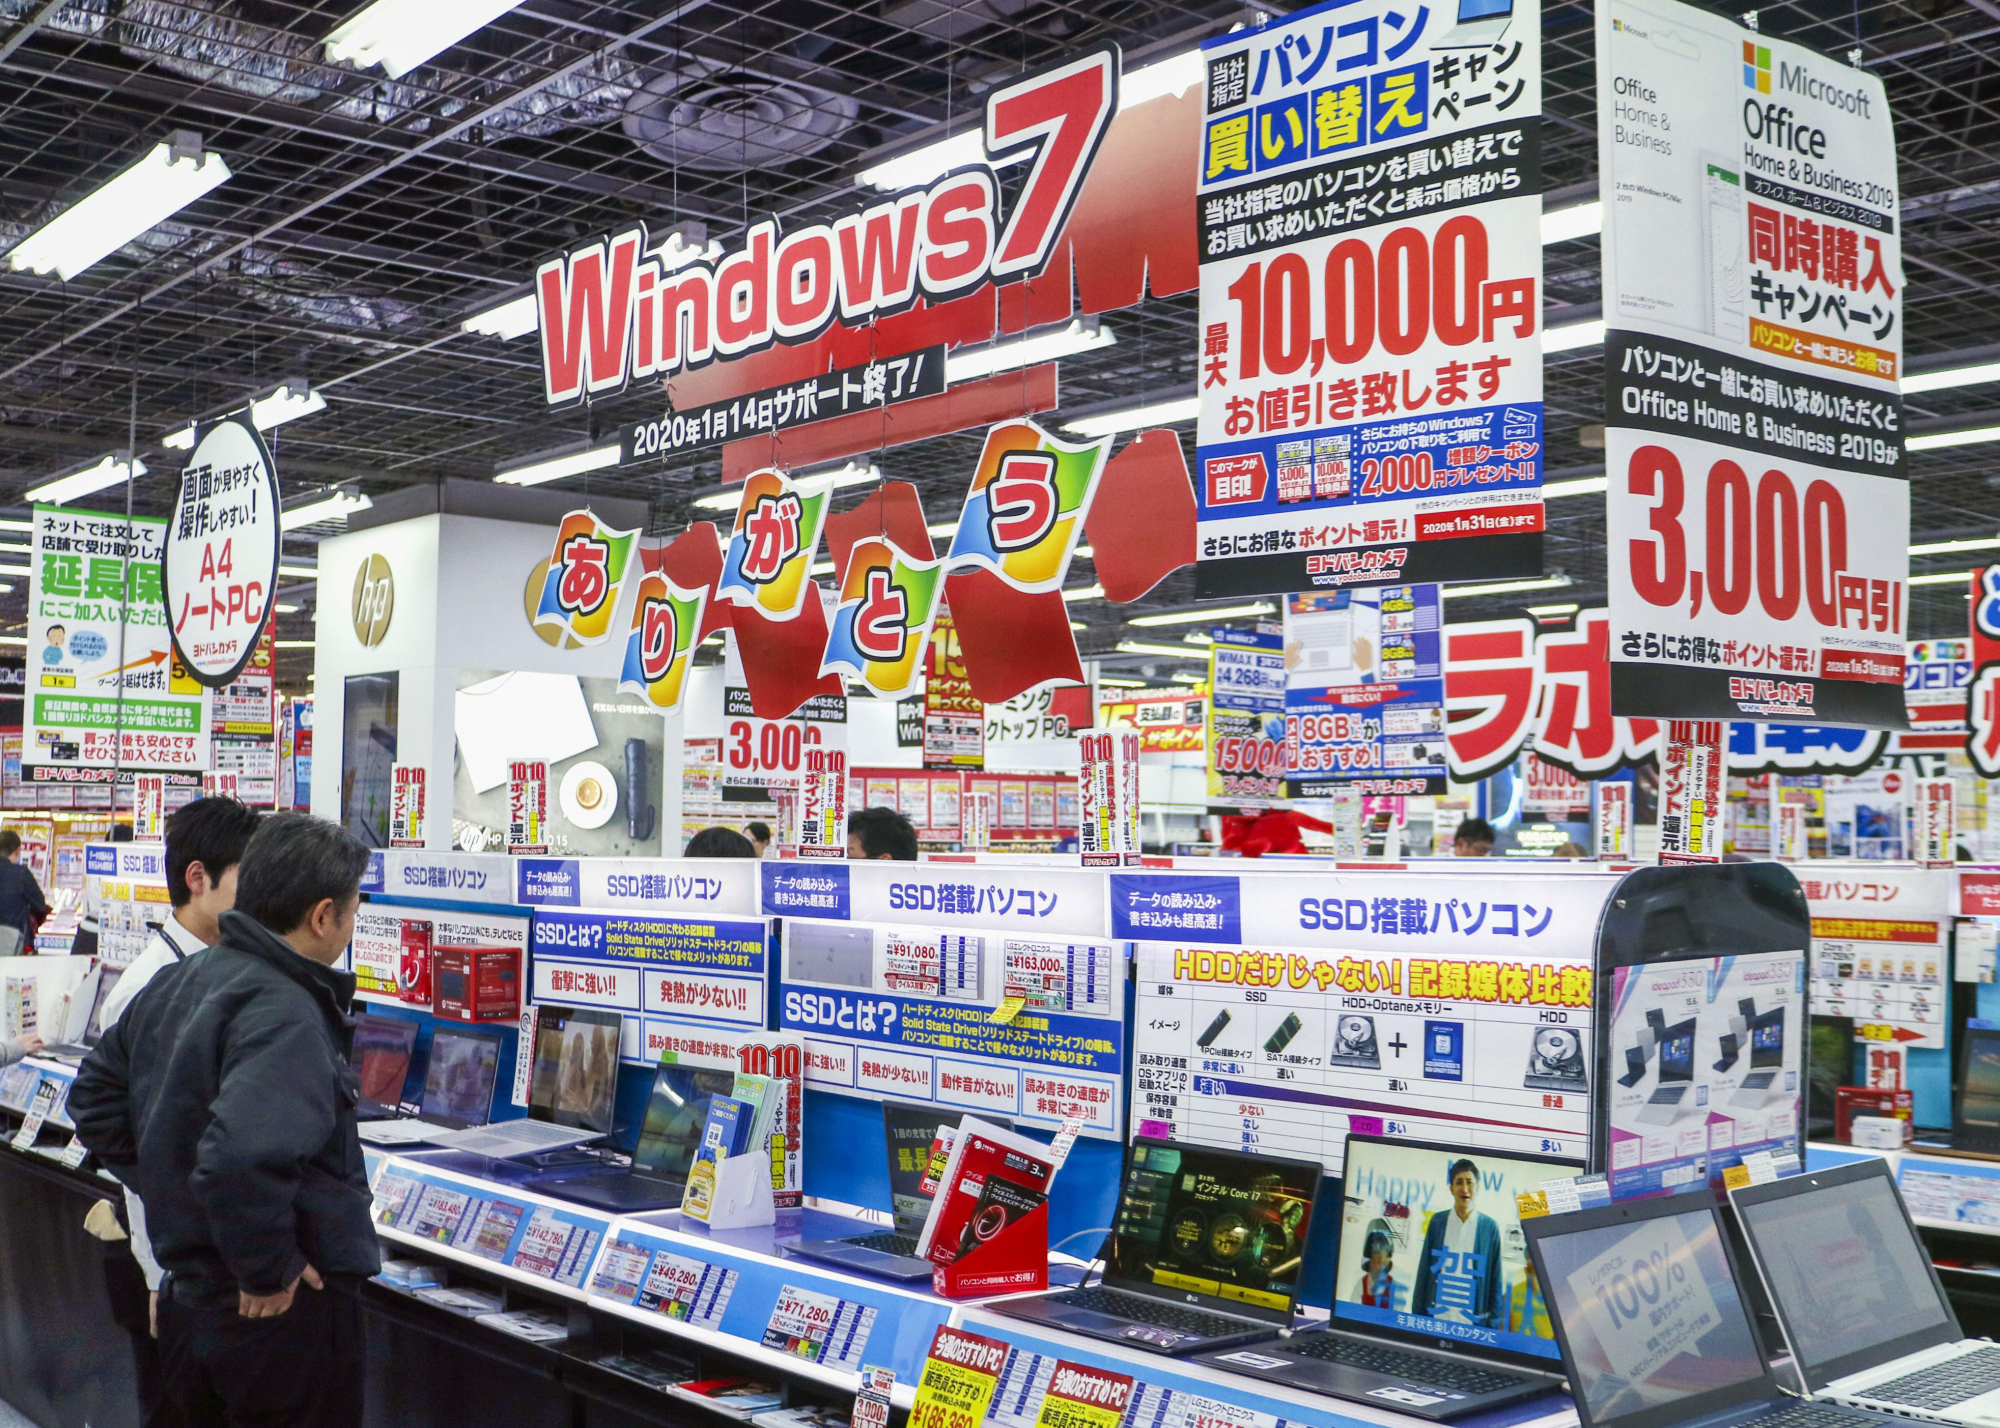 Sales staff urge visitors to replace computers running on Windows 7 with Windows 10 machines at a Yodobashi Camera store in Tokyo on Tuesday. | KYODO